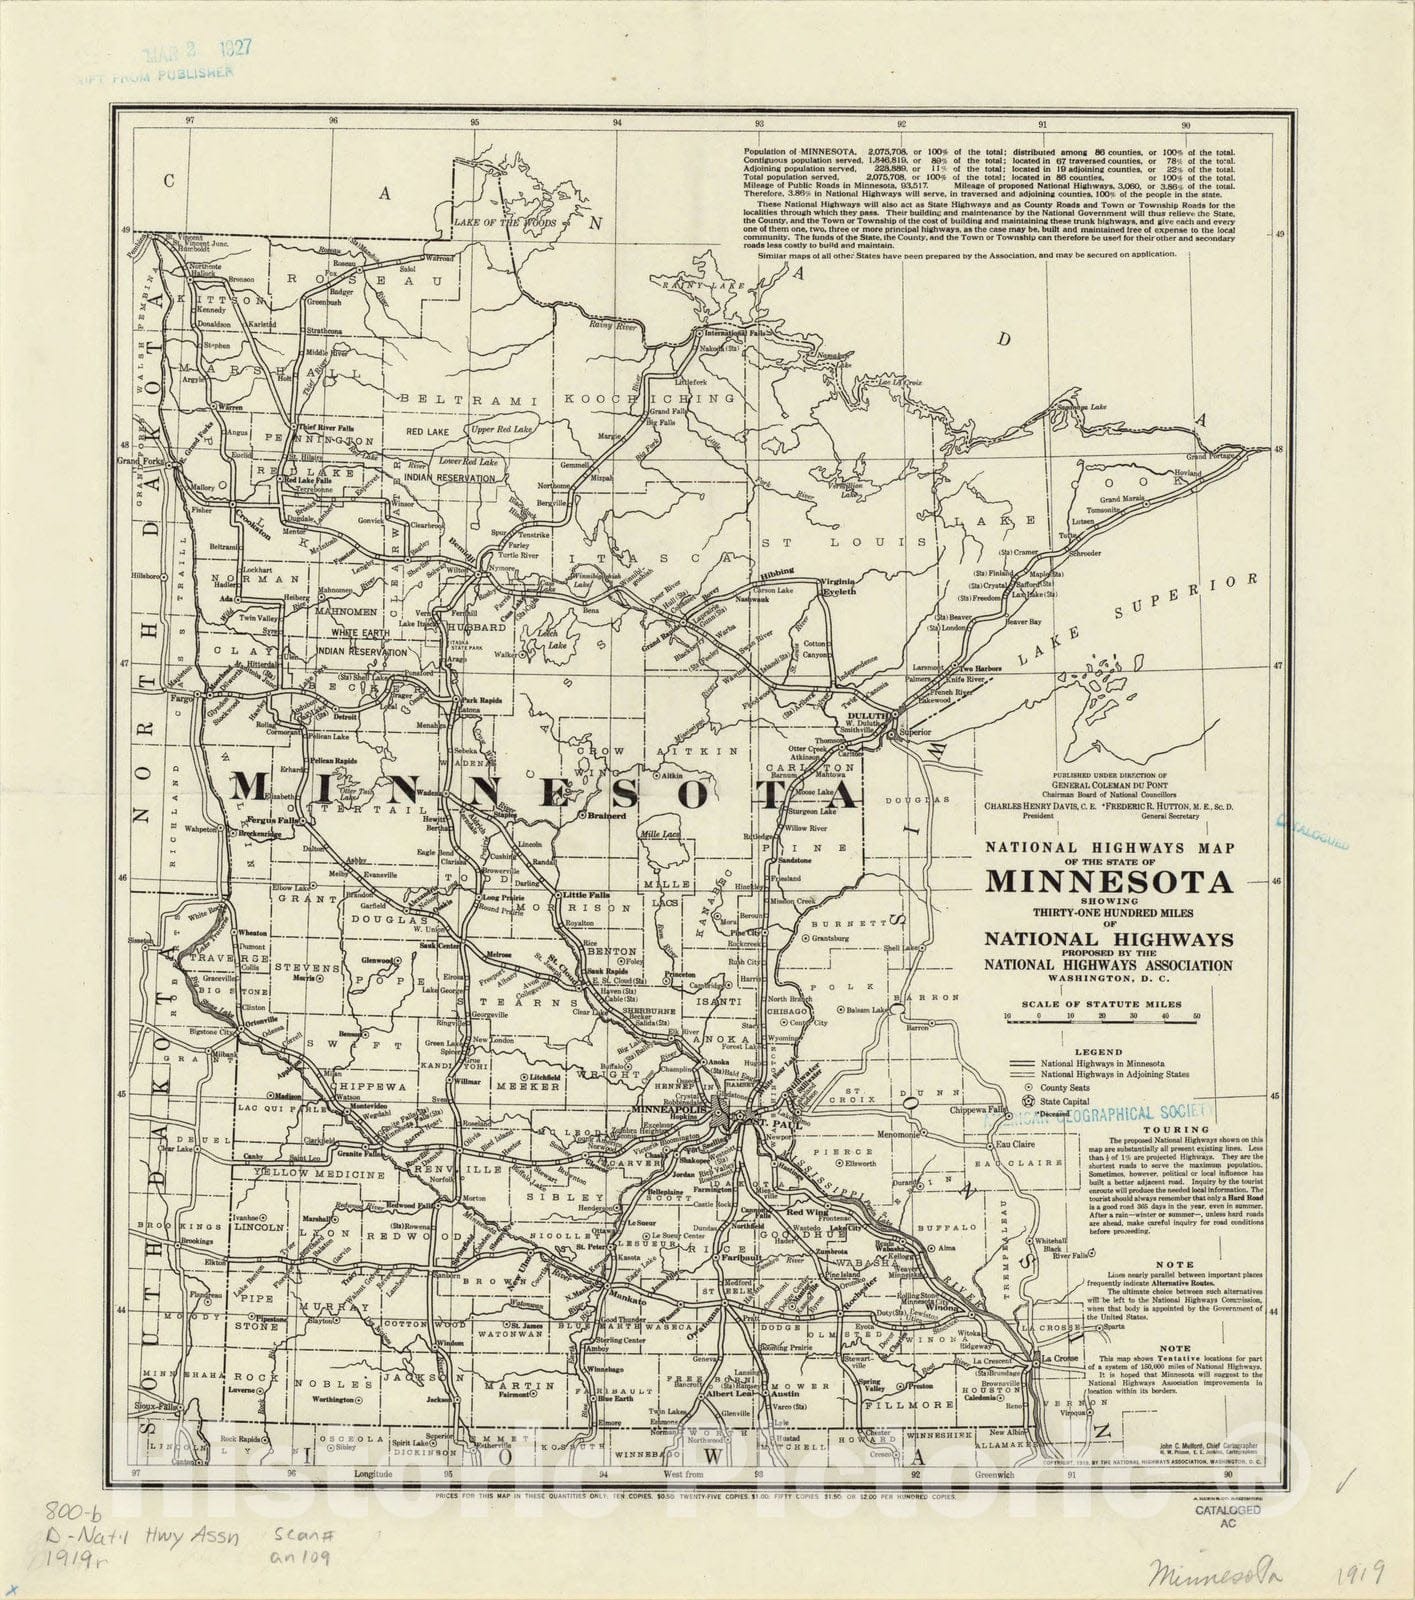 Map : Minnesota 1919, National highways map of the state of Minnesota: showing thirty-one hundred miles of national highways